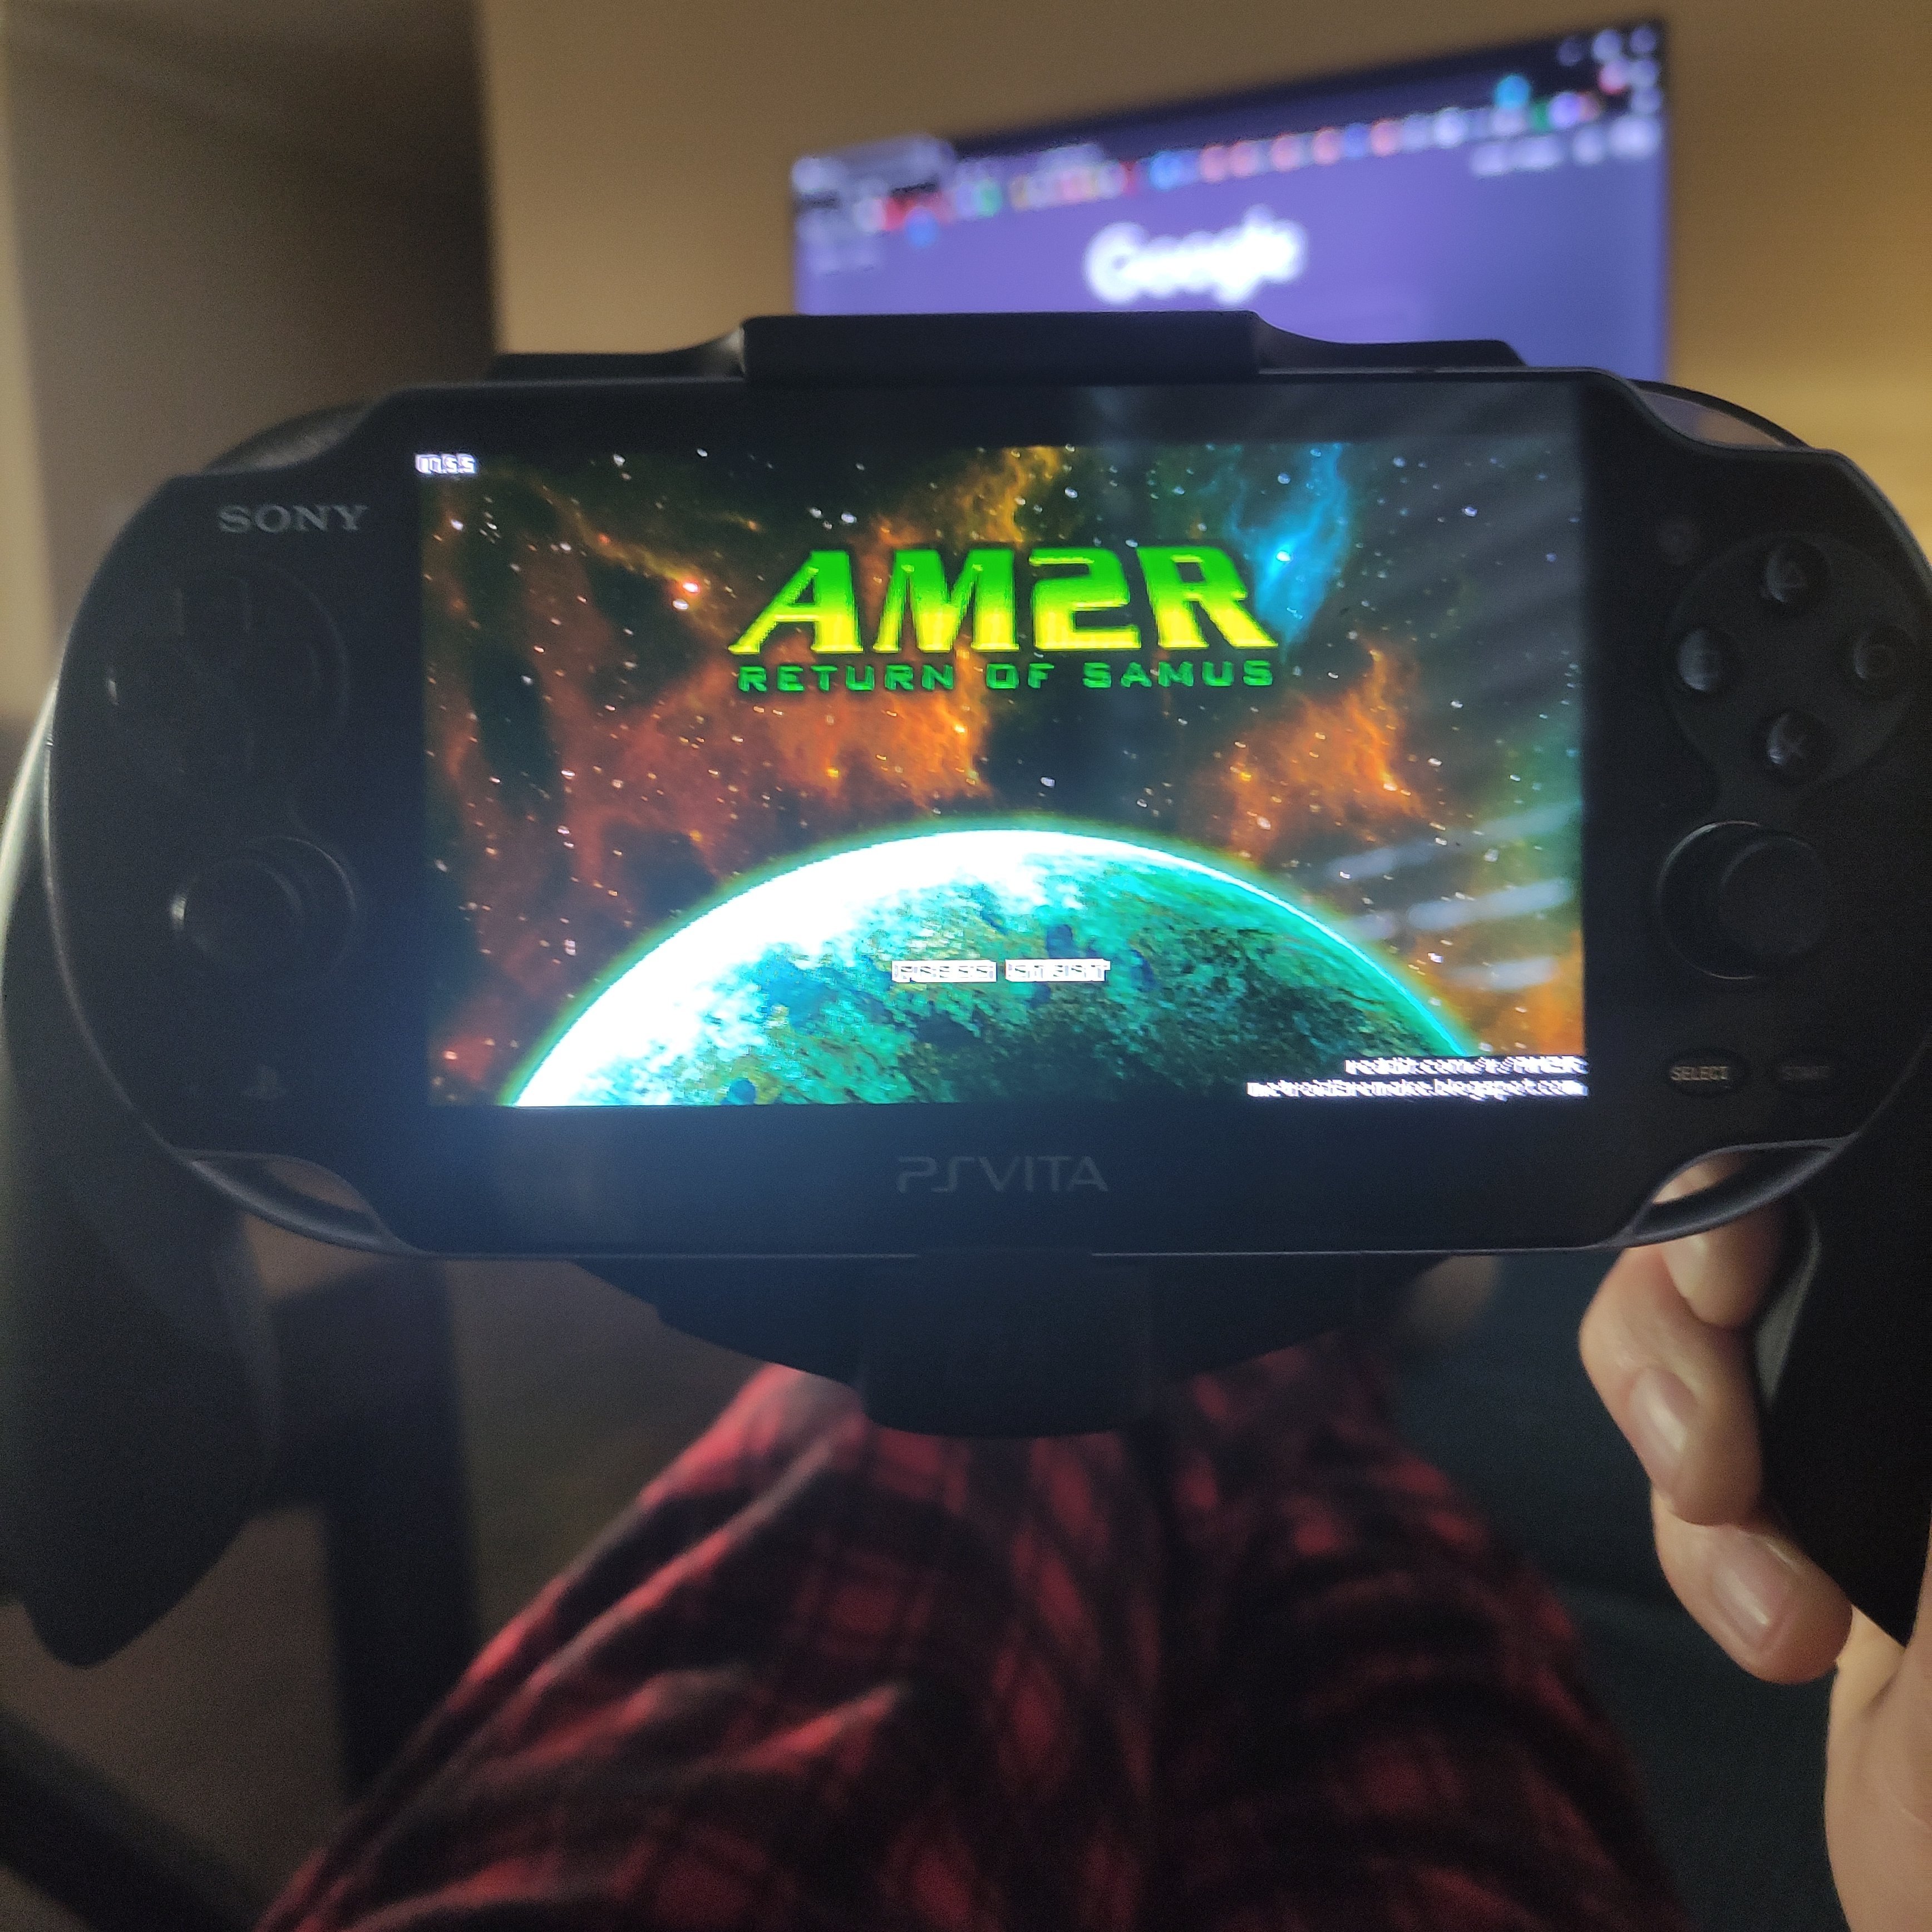 RELEASE] YoYo Loader (emulator that launches Android apk directly on the  Vita) by Rinnegatamante | GBAtemp.net - The Independent Video Game Community